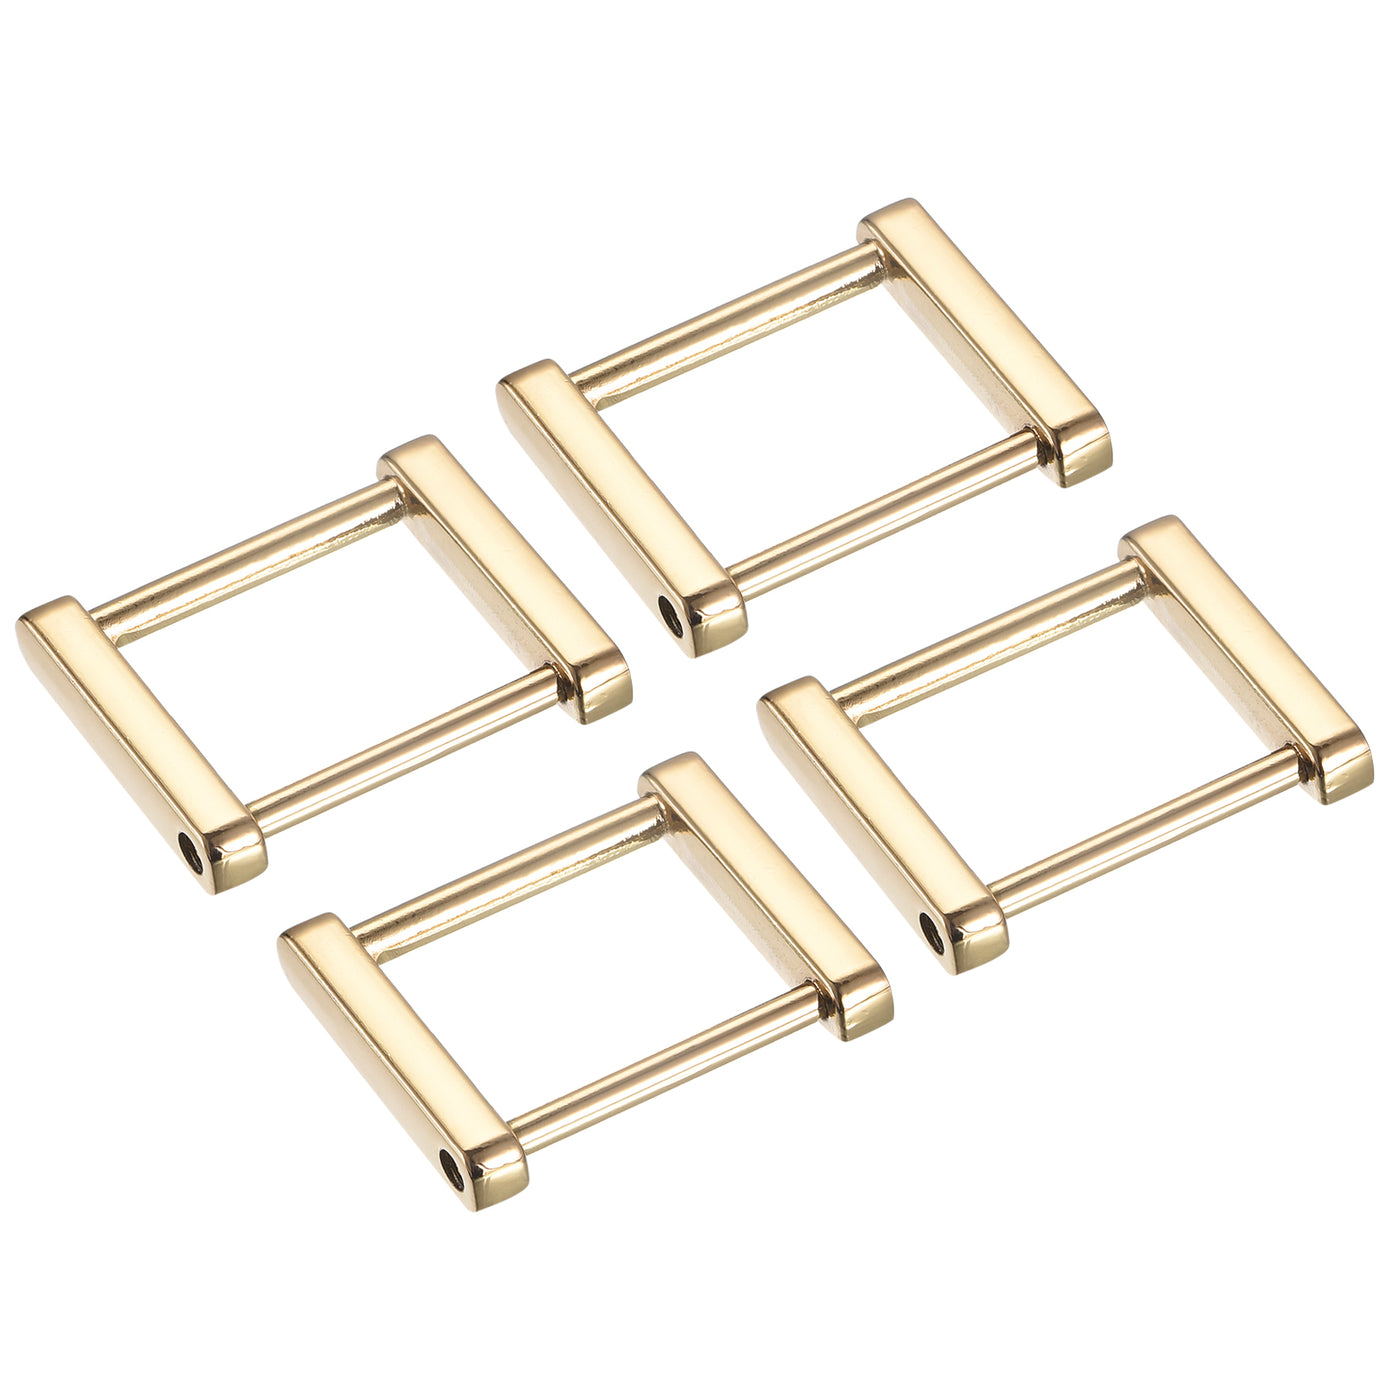 uxcell Uxcell 1.4 Inch Rectangle Screw Ring Buckle Strap Connector Purse Bag Loop, 4Pcs Gold